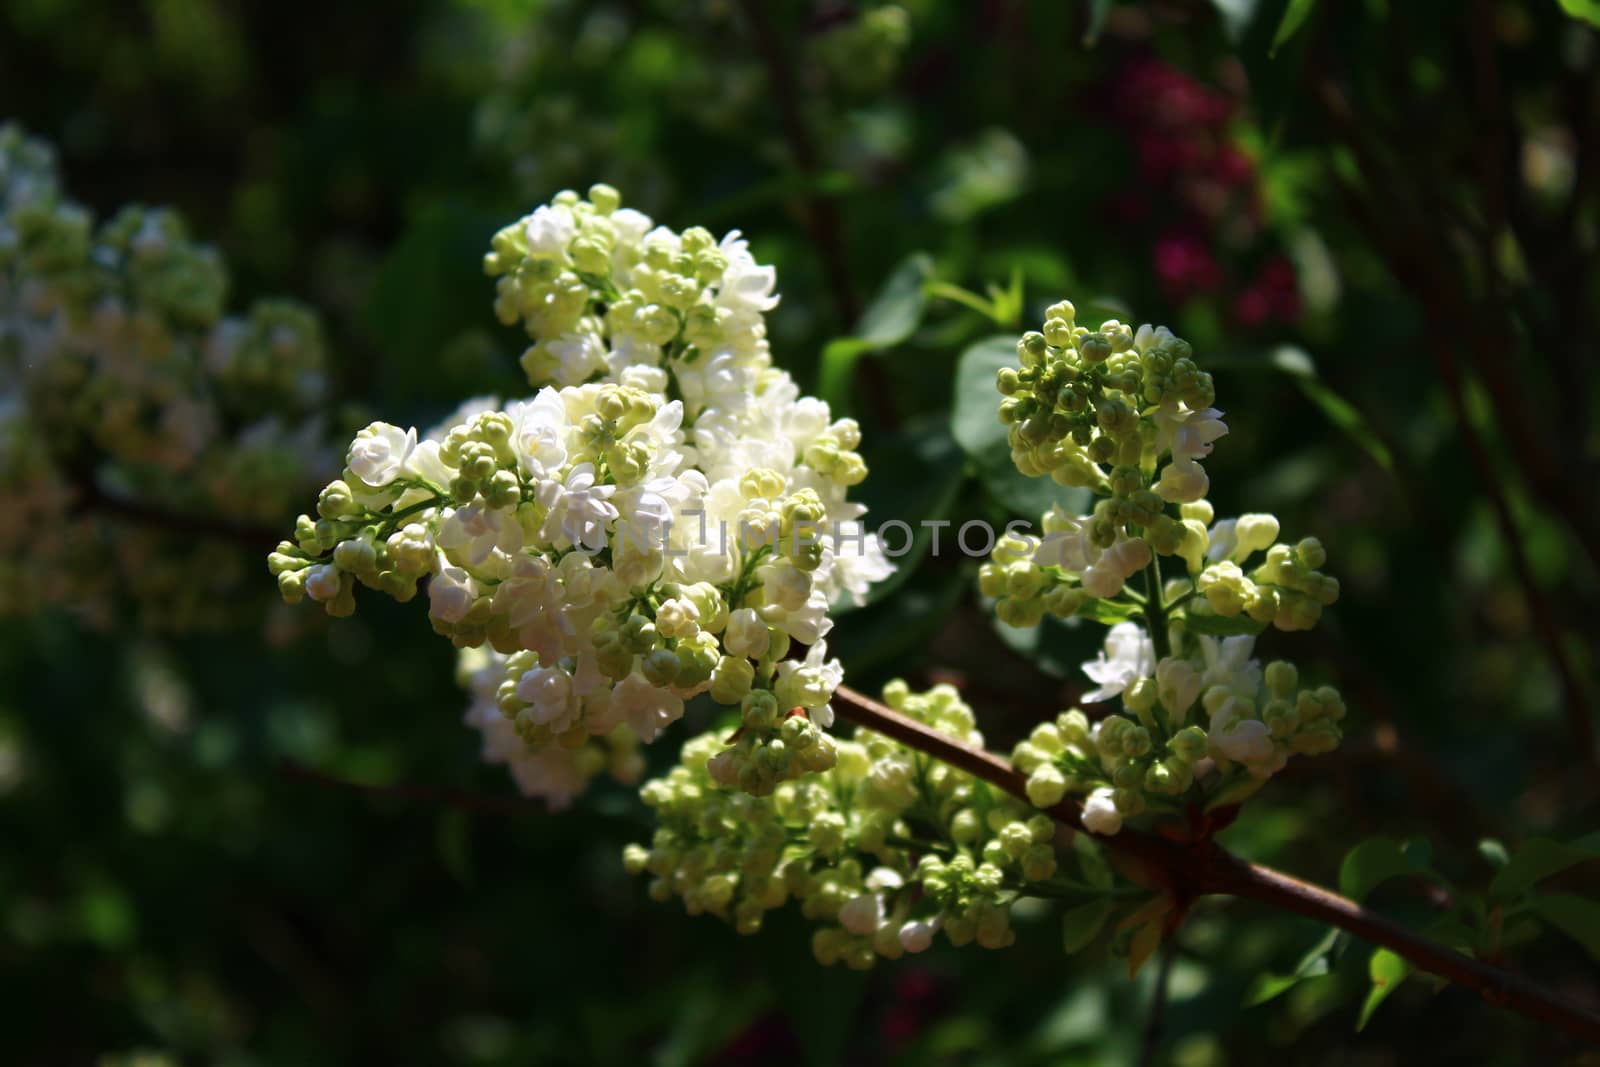 The picture shows white lilac in the garden.